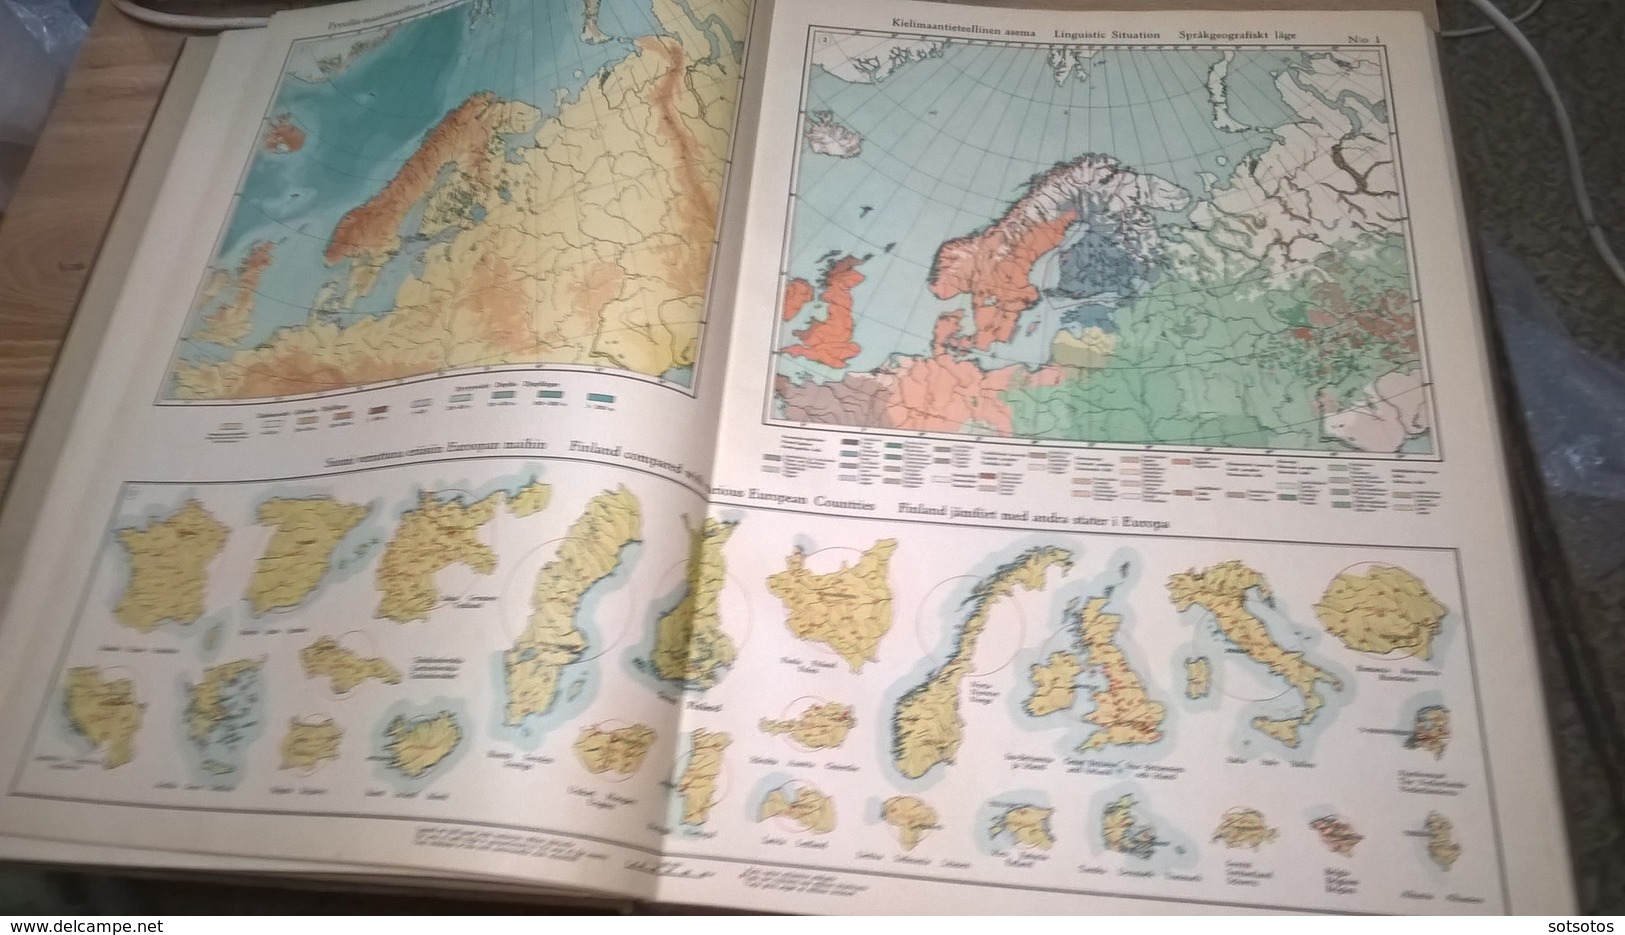 ATLAS of FINLAND - ATLAS OVER FINLAND (SUOMEN KARTASTO) 1925 - The GEOGRAPHICAL SOCIETY of FINLAND - 160PGS (8+38X4) - 3